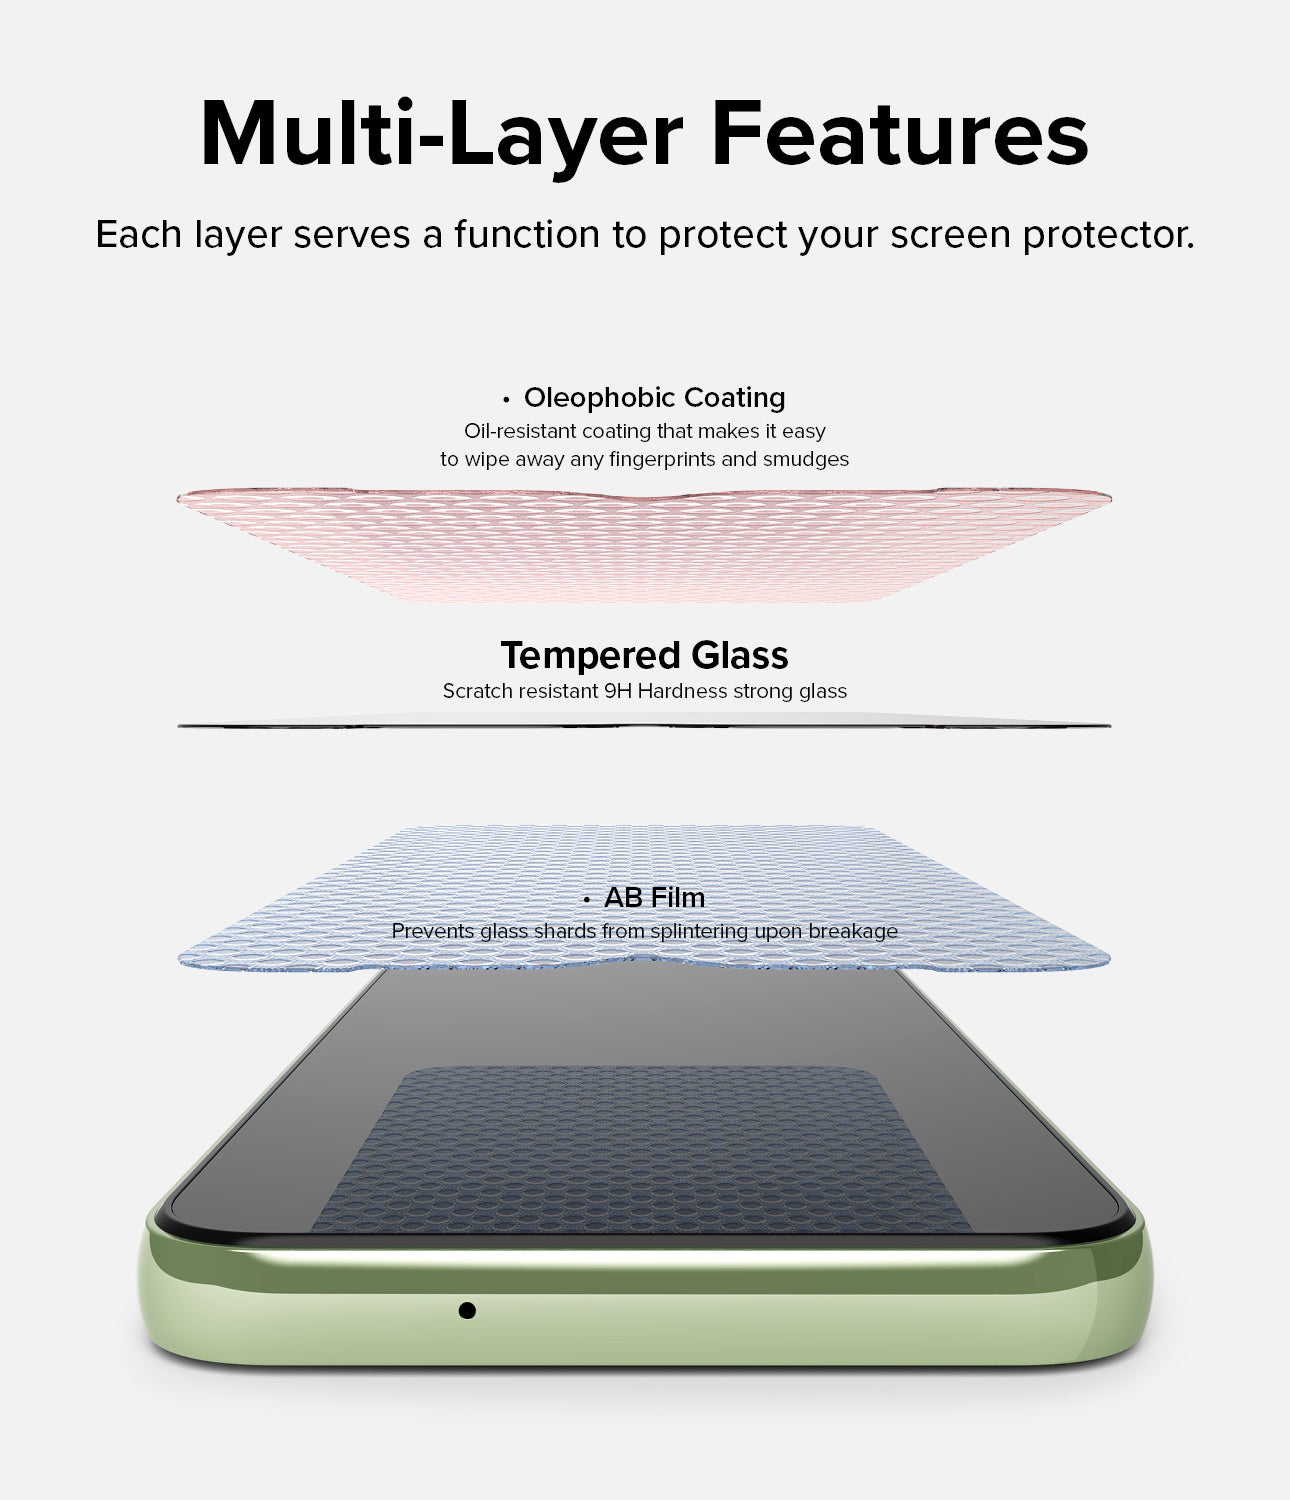 Multi-Layer Features l Each layer serves a function to protect your screen protector. * Oleophobic Coating l Oil-resistant coating that makes it easy to wipe away any fingerprints and smudges. l Tempered Glass - Scratch resistant 9H Hardness strong glass * AB Film - Prevents glass shards from splintering upon breakage